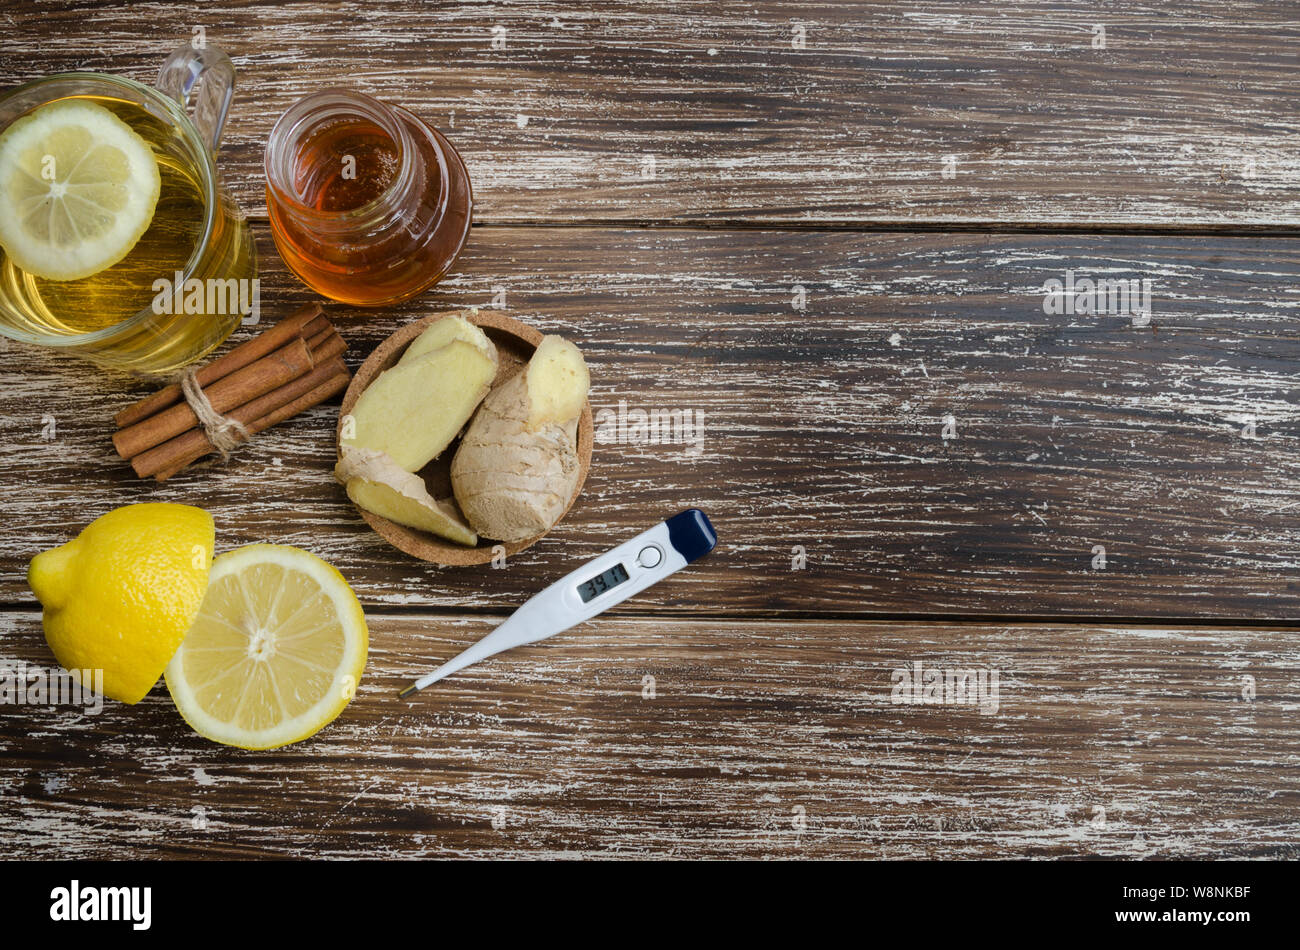 Ginger , lemon,spice honey and with thermometer.  Alternative treatment for cold or flu symptoms. Traditional medicine and natural health care concept Stock Photo